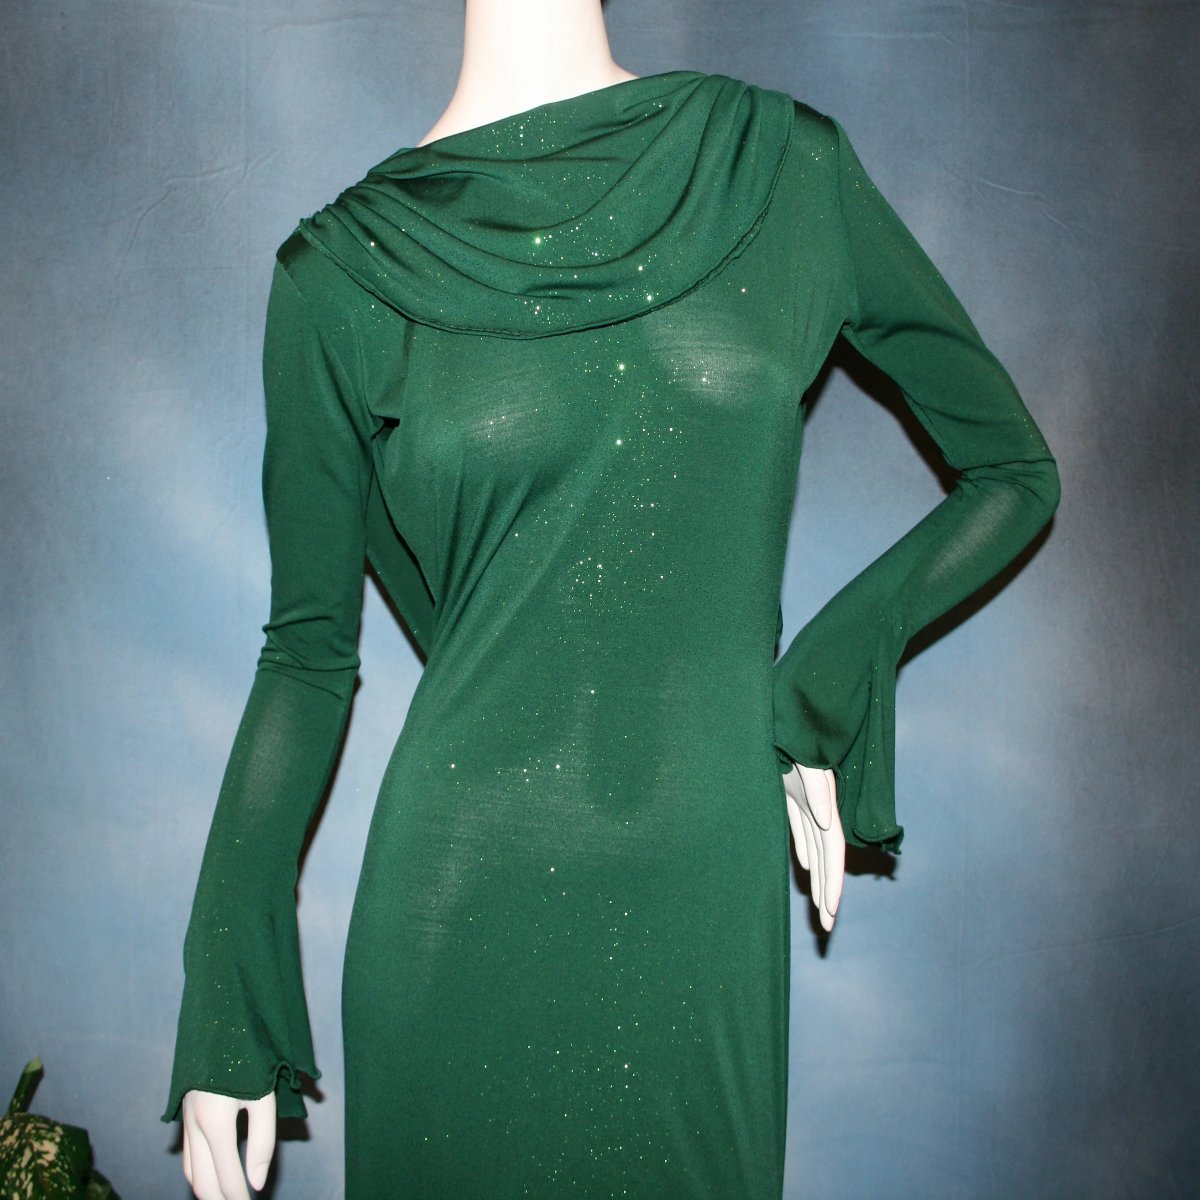 Crystal's Creations close up view of Green social ballroom dress was created in luxurious deep emerald glitter slinky, with full  & flaring skirt bottom, long flair sleeves & draping trailing down the back makes this gorgeous dress very elegant & classy!